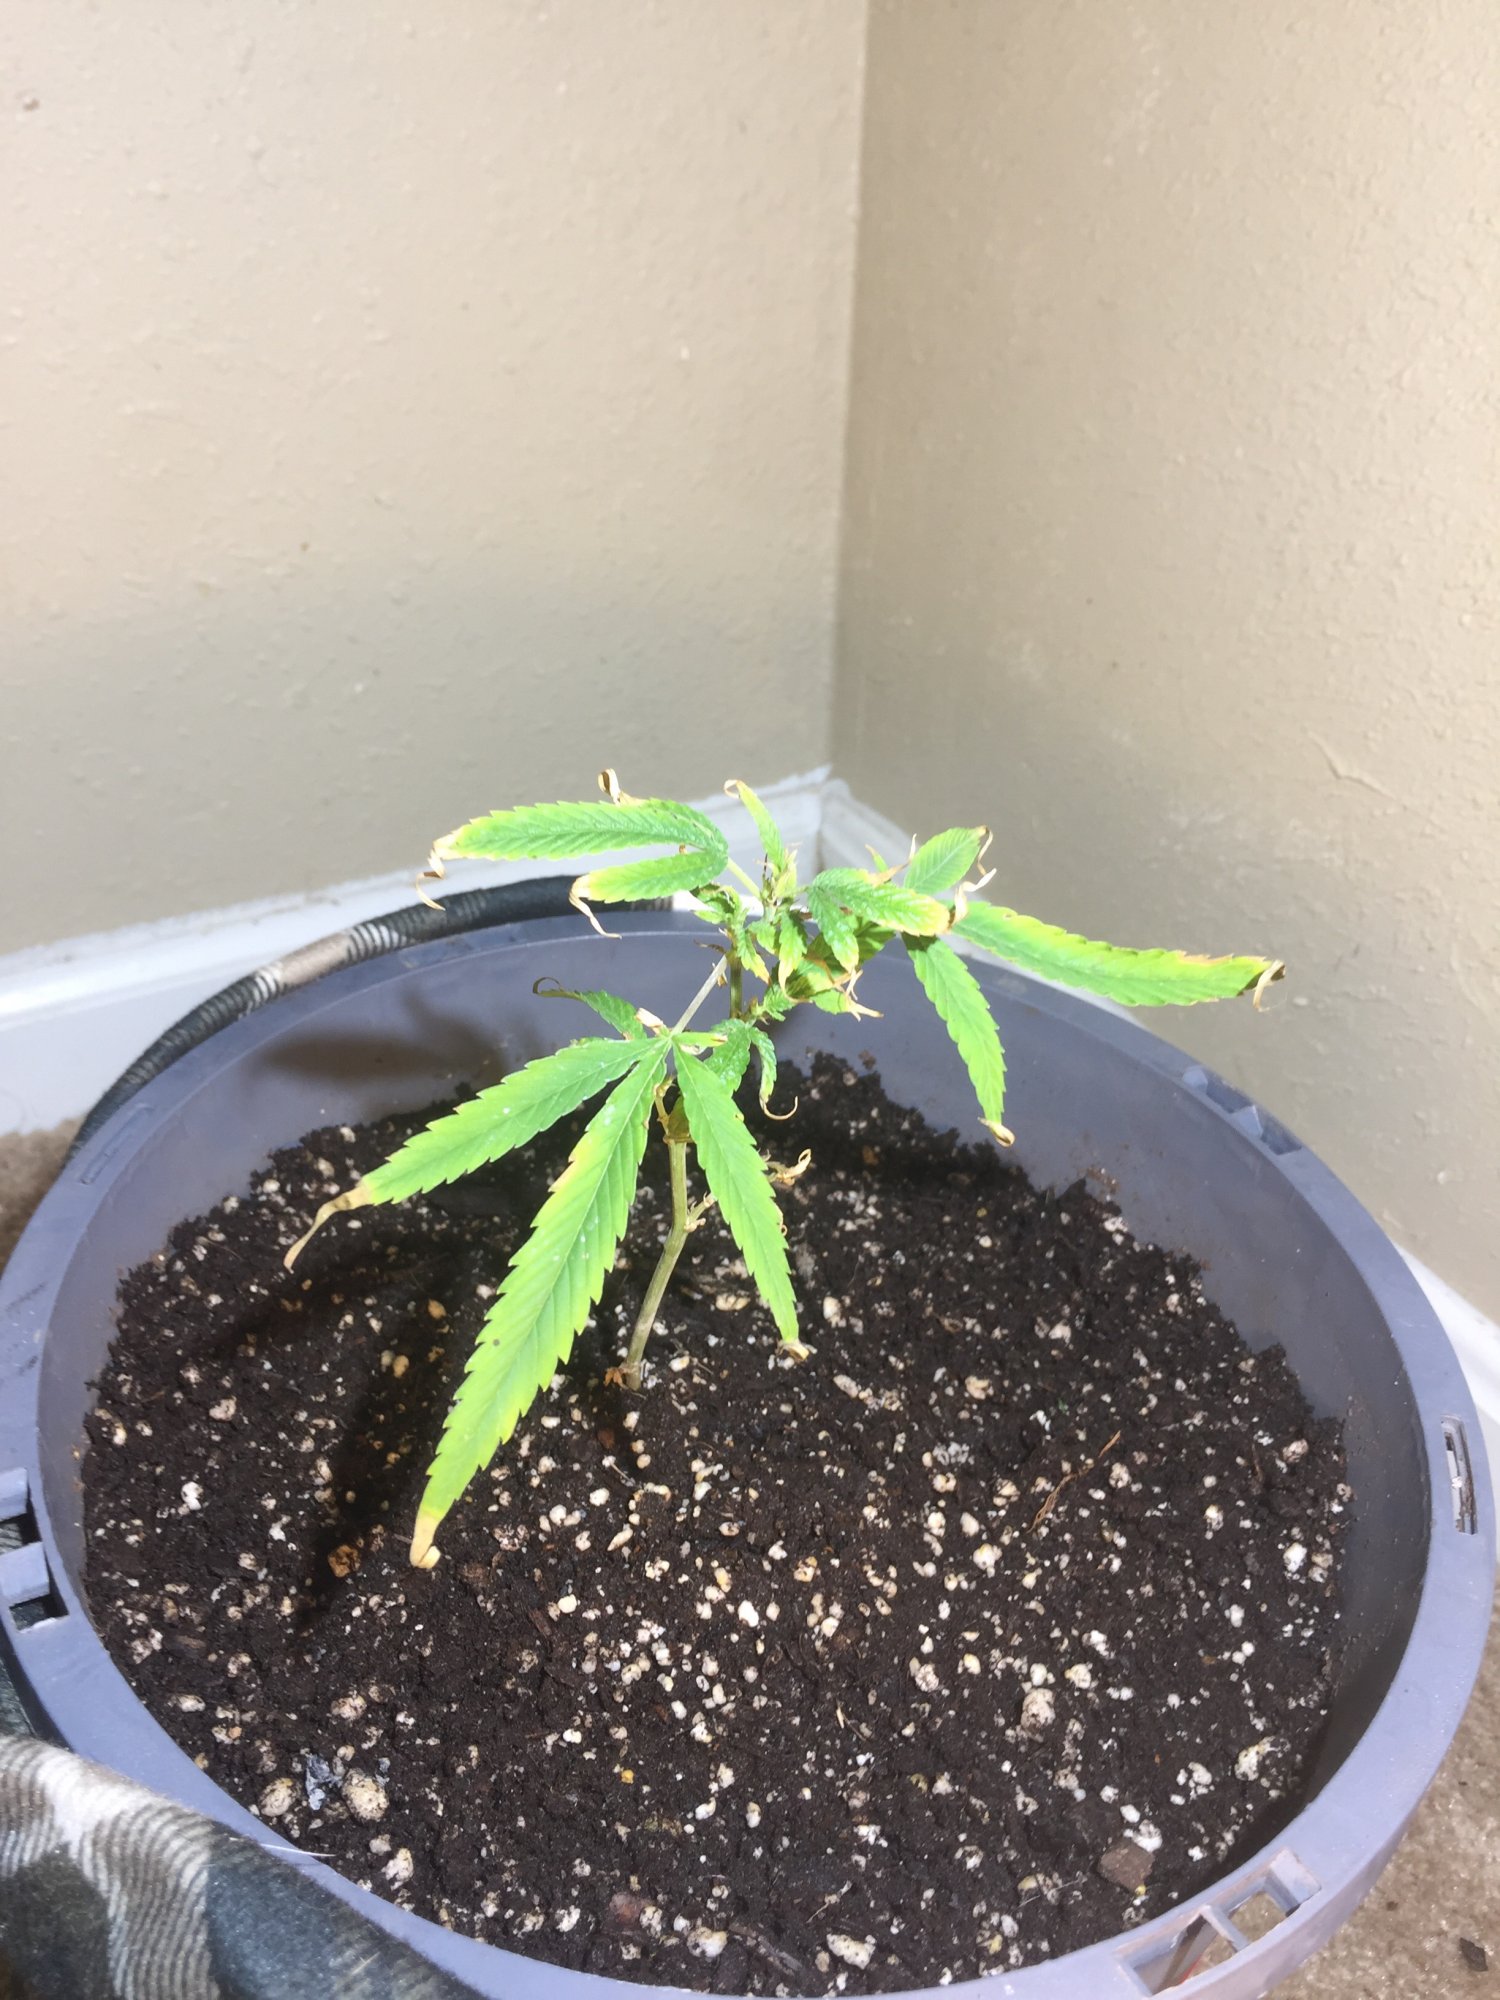 Any help from experience grower 2